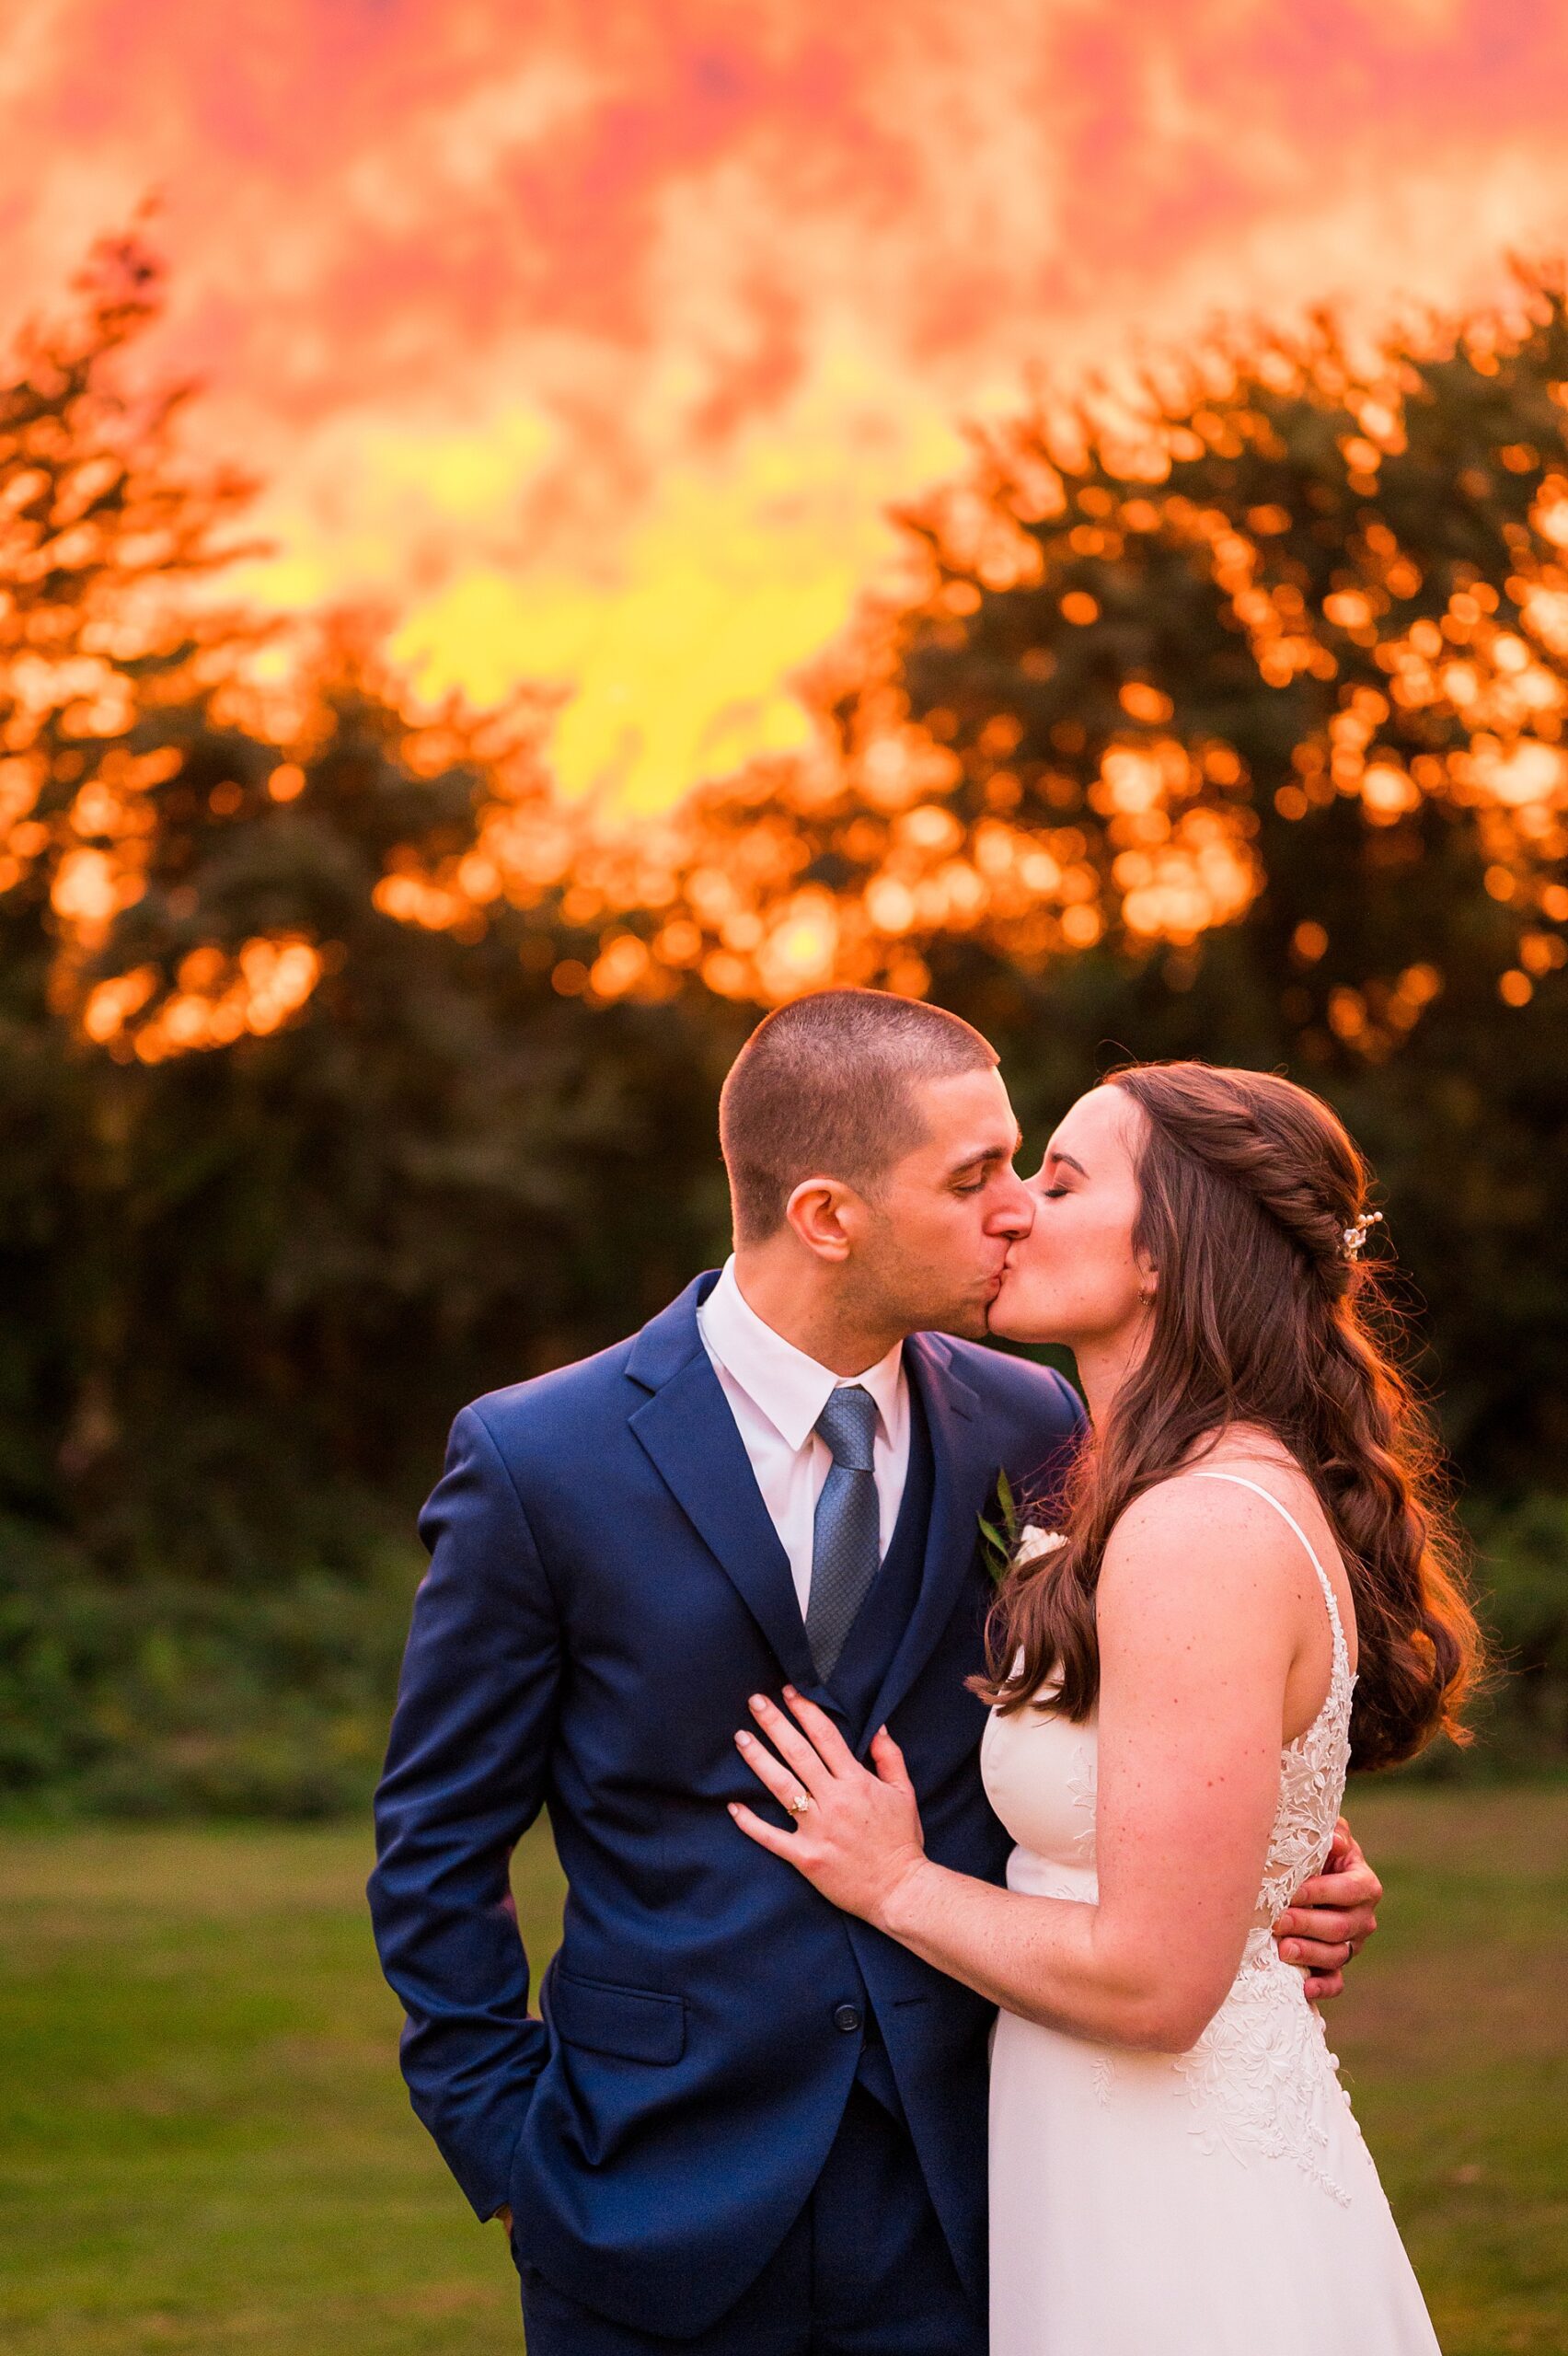 epic sunset wedding portraits from North Shore wedding  at The Hellenic Center